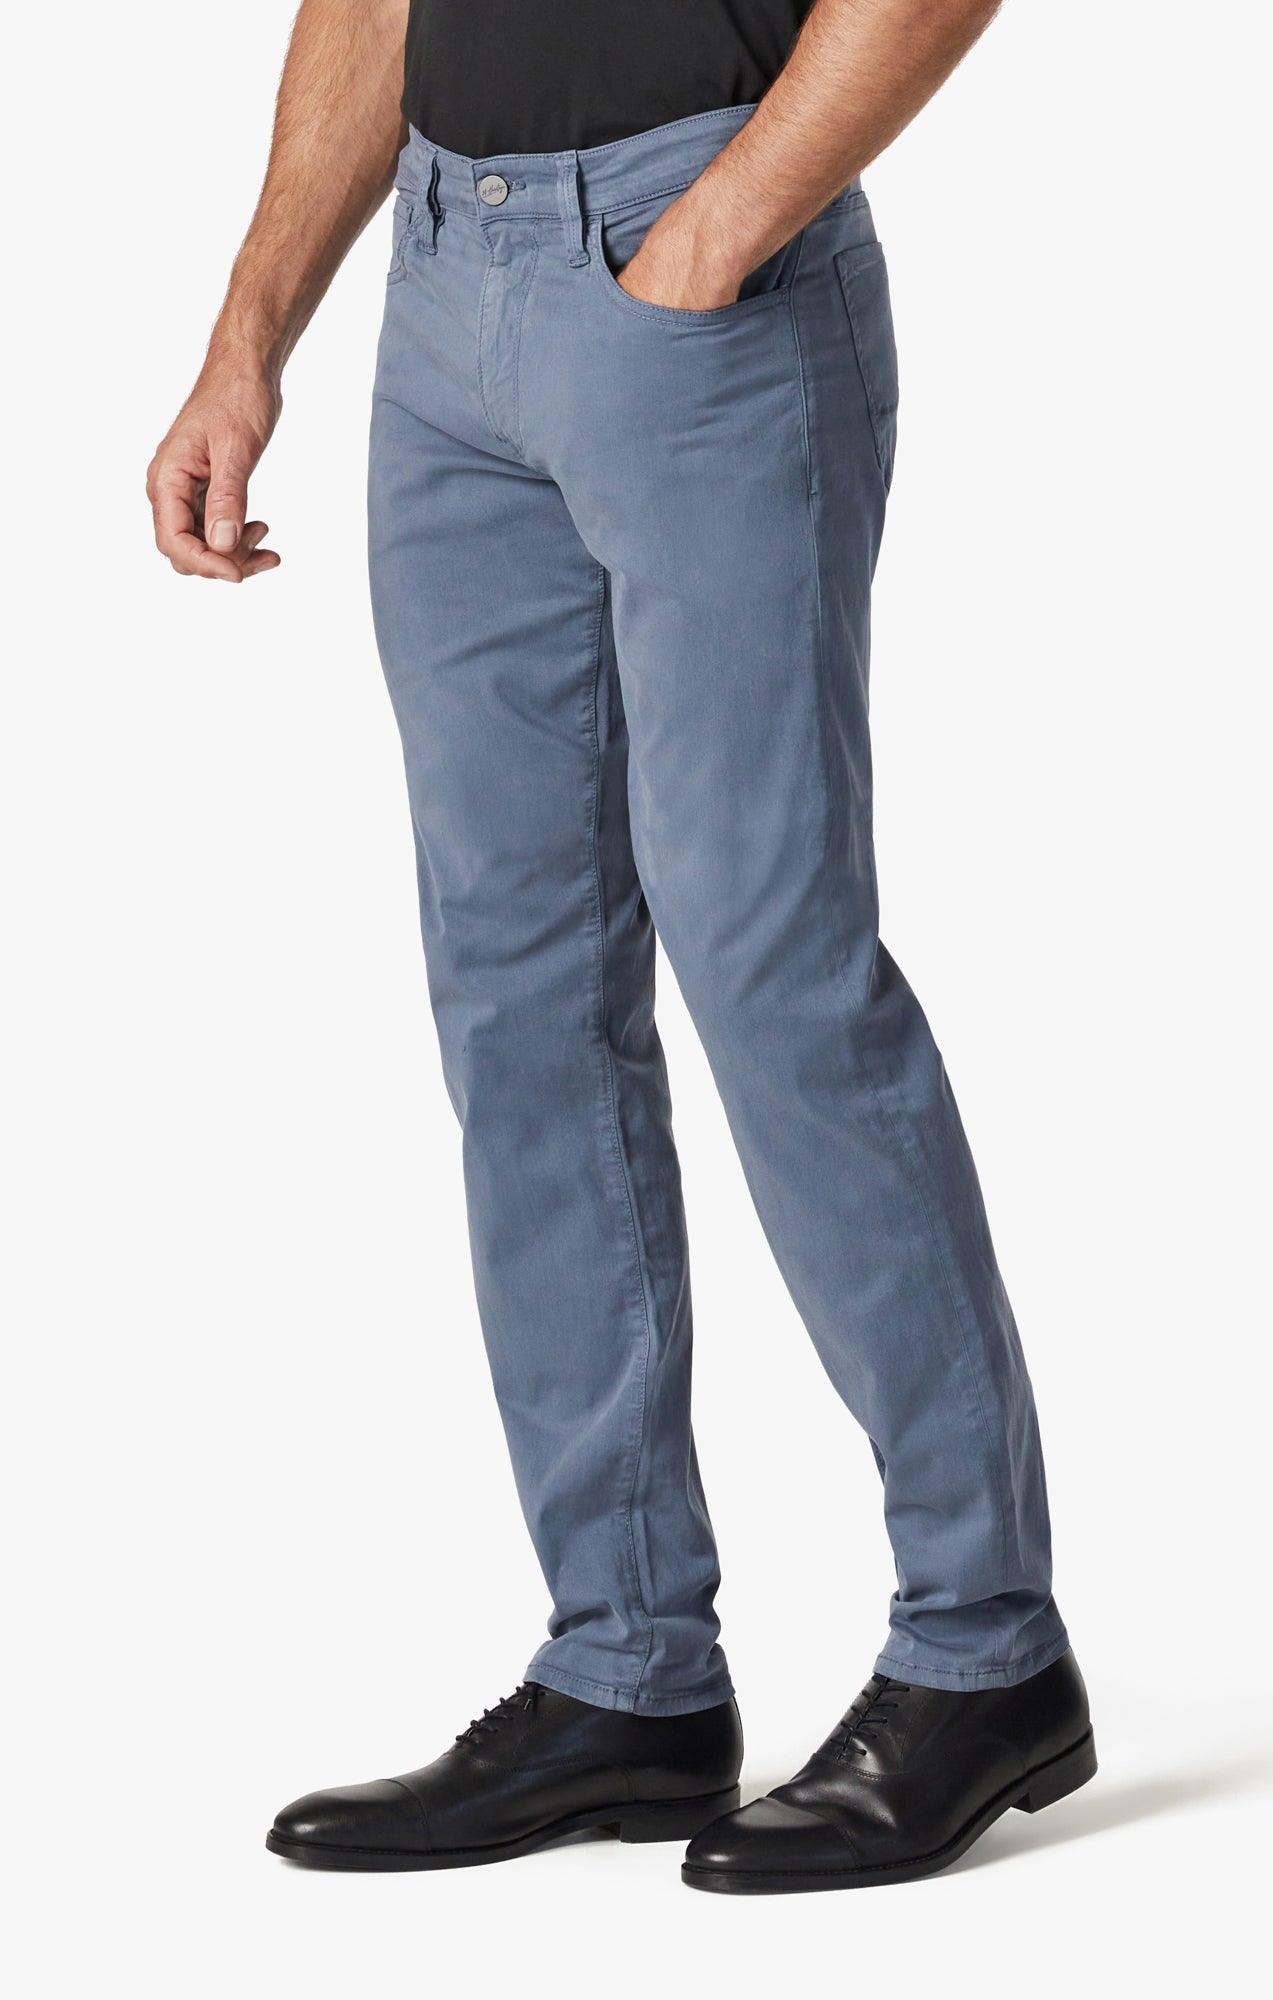  AR/M3PB-34B, Blue Belted Pants Polyester Male 34 Reg: Clothing,  Shoes & Jewelry